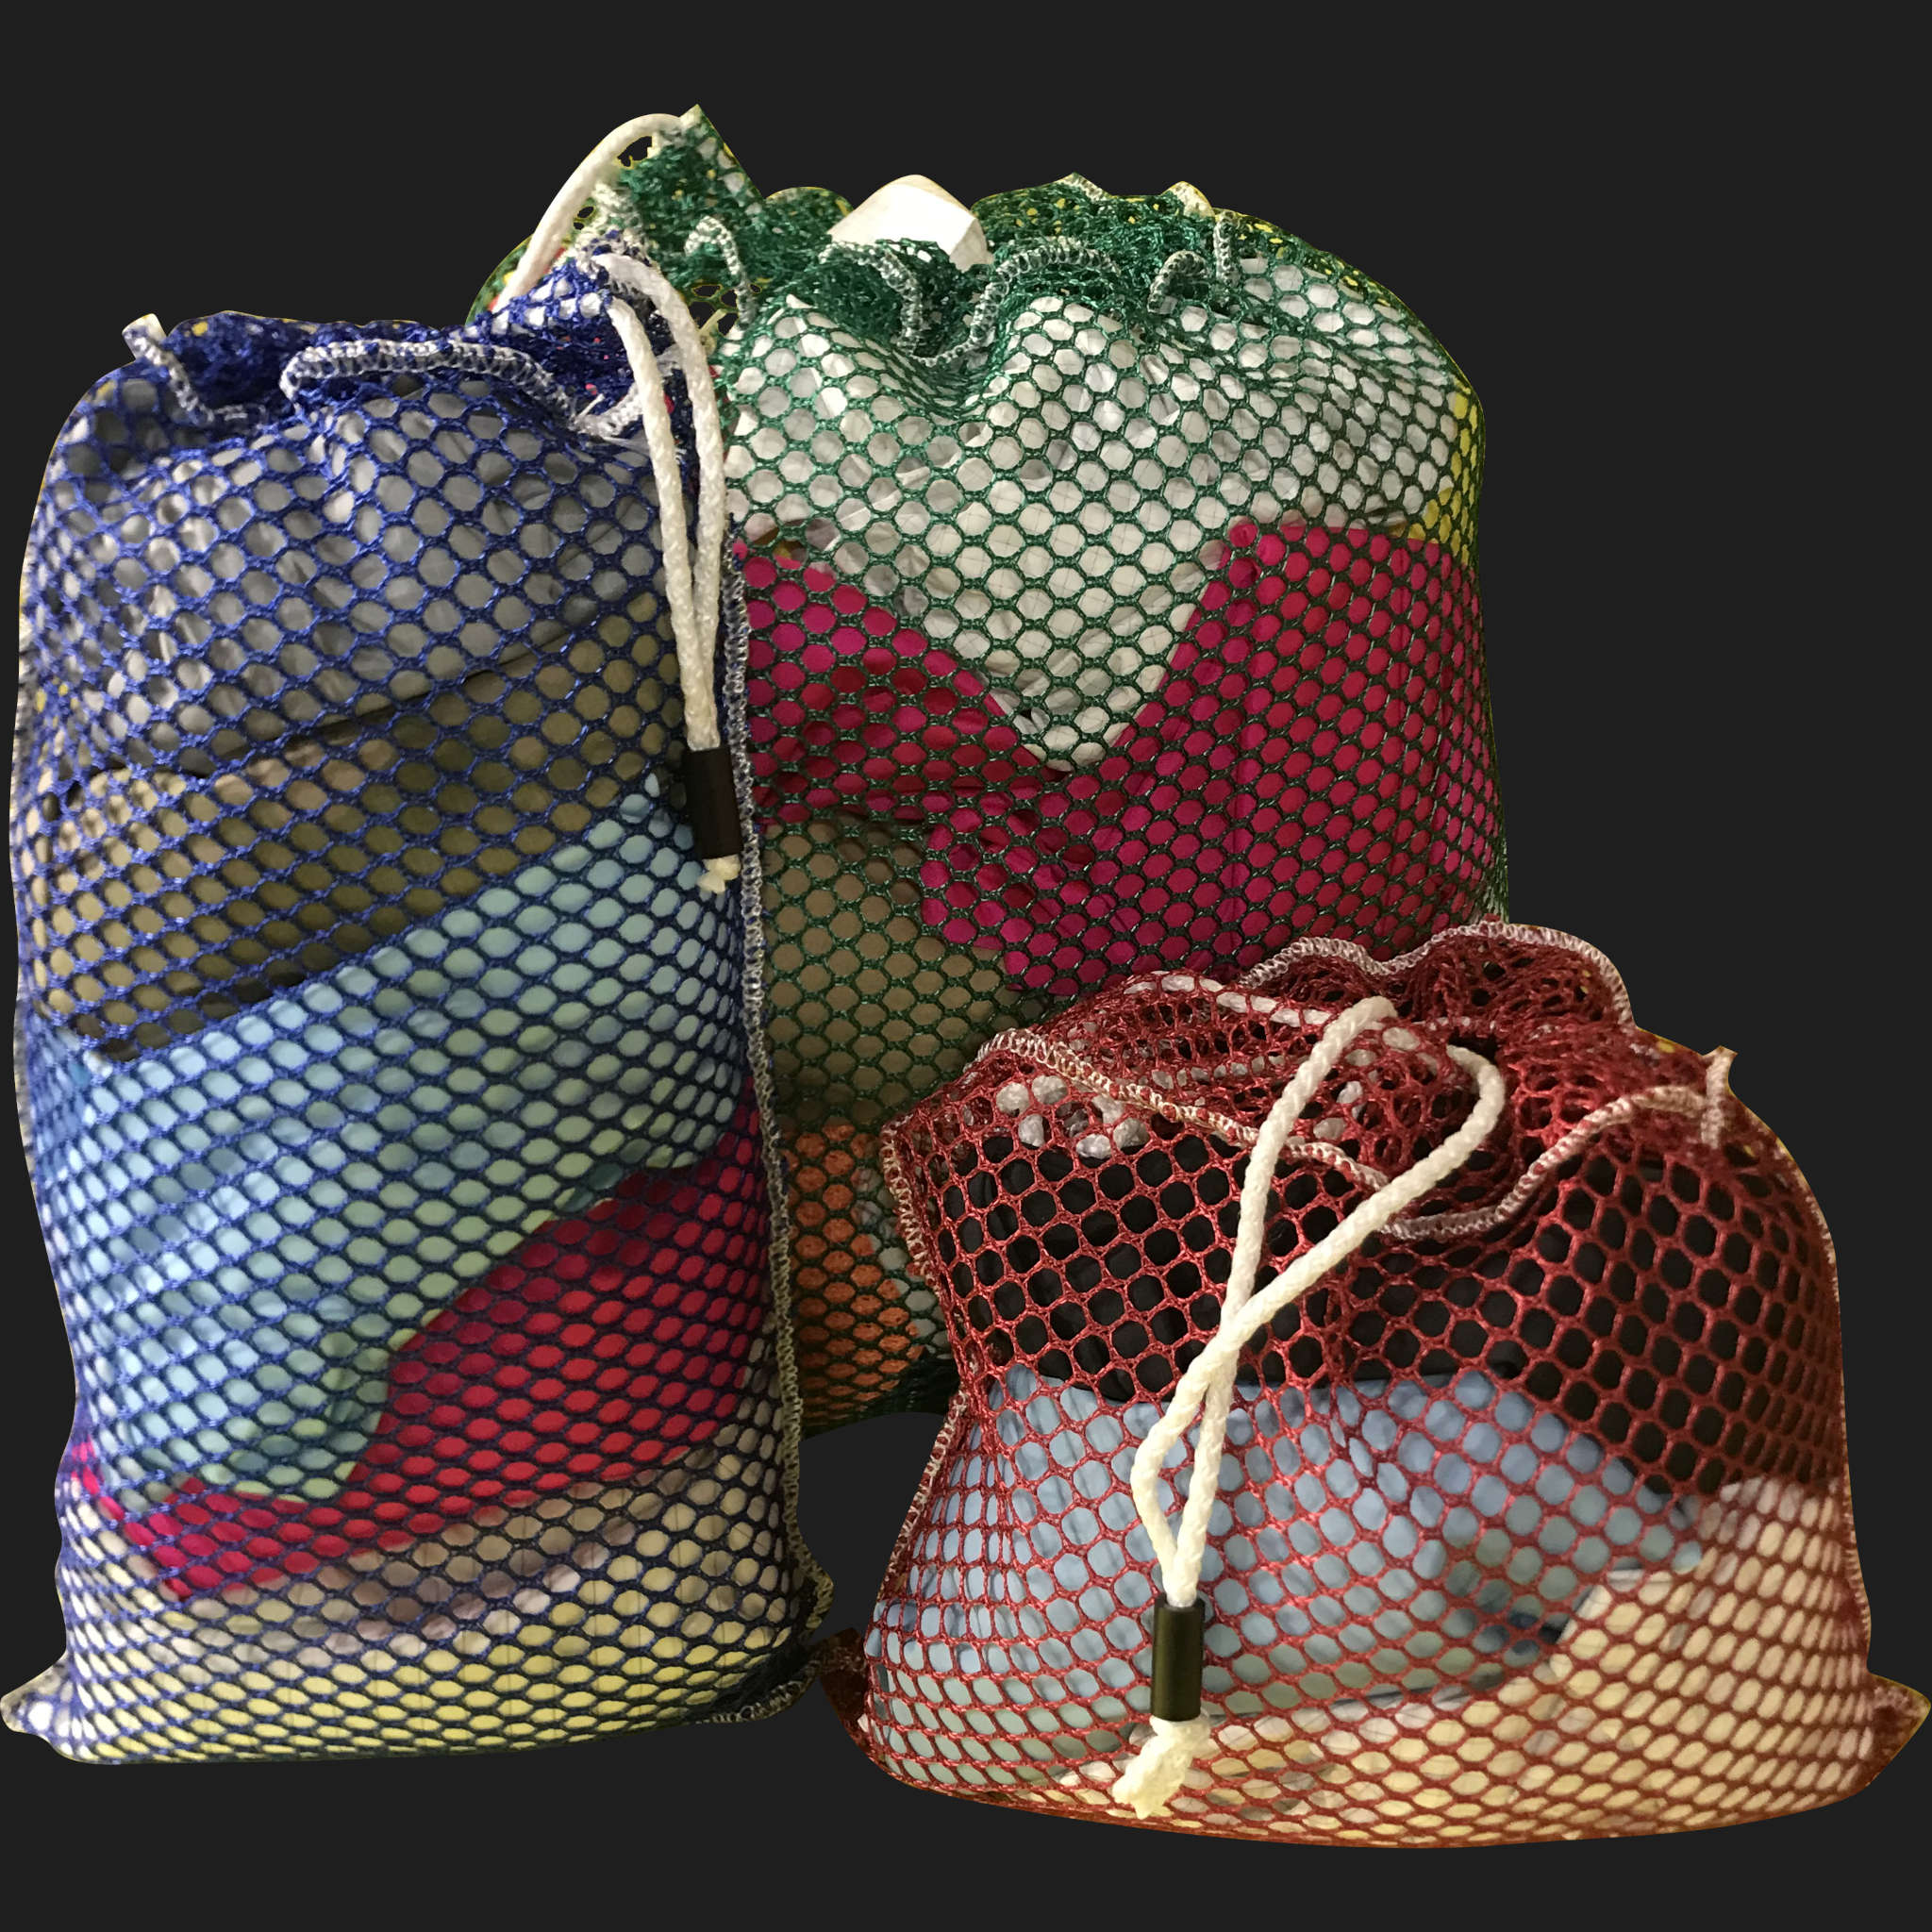 54" x 82" Customized Mesh-Net-Laundry Bags Heavy Duty with Cord and barrellock closure